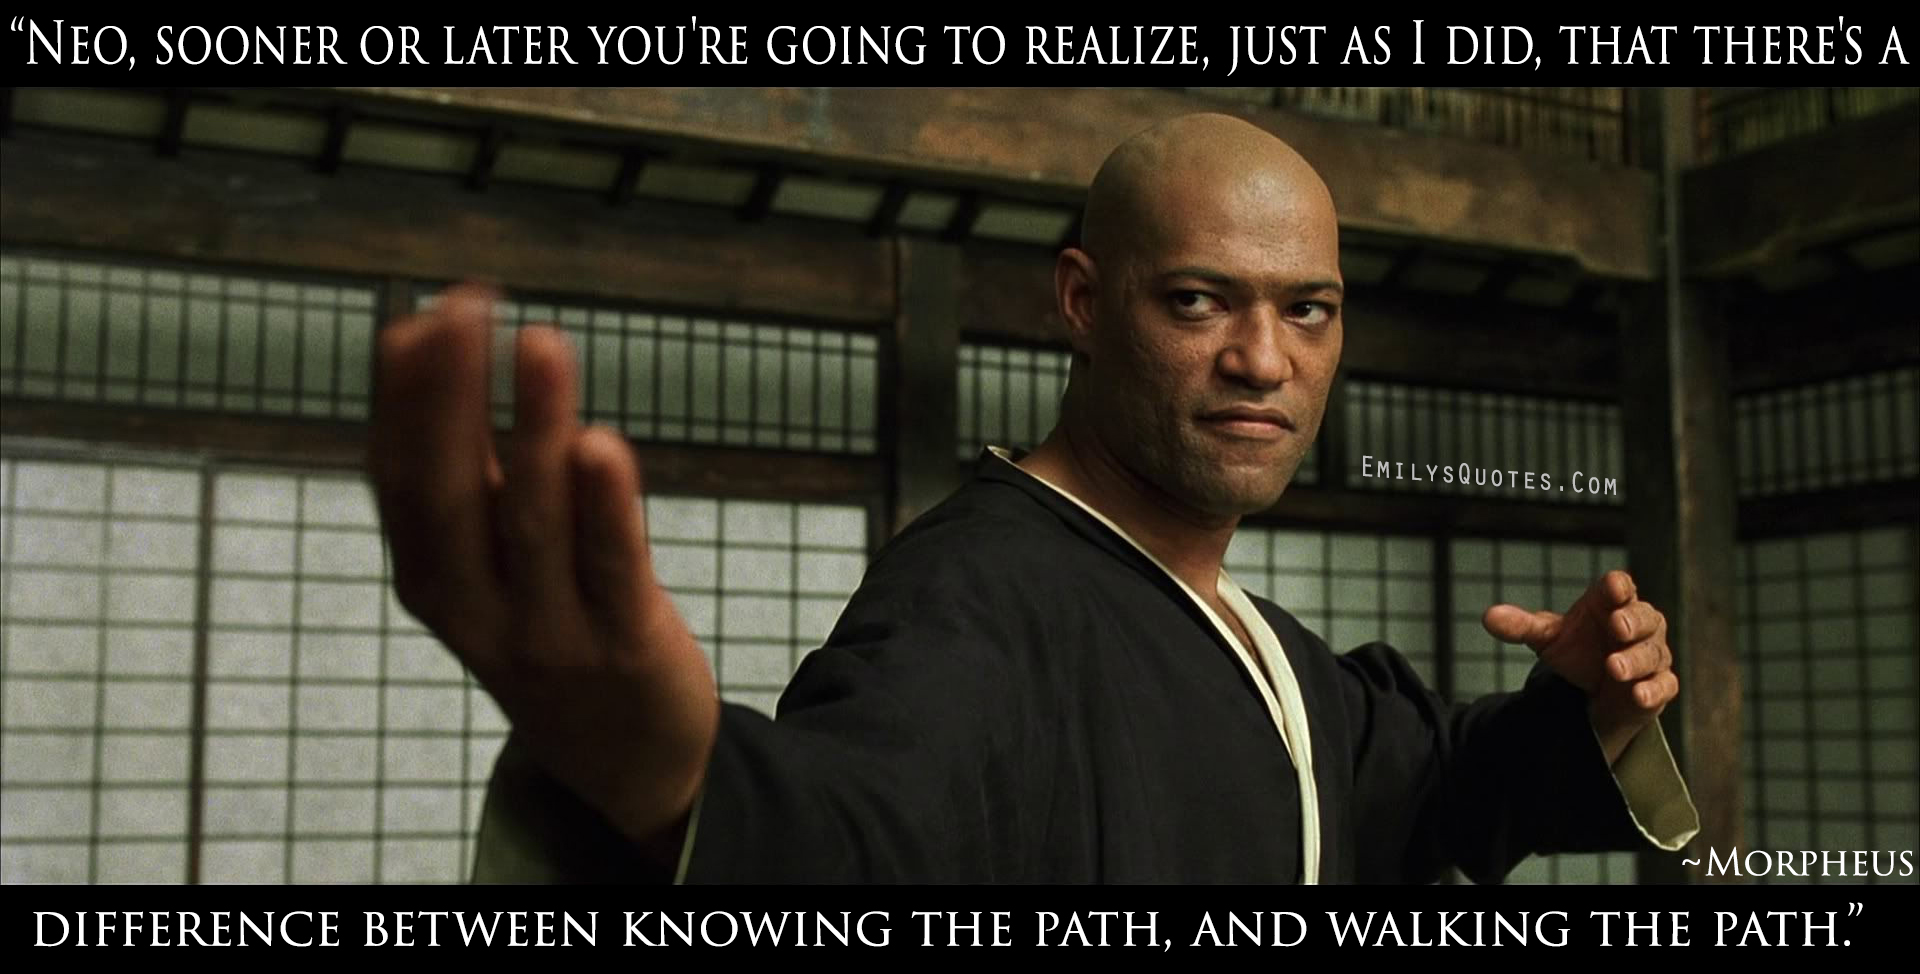 Neo, sooner or later you’re going to realize, just as I did, that there’s a difference between knowing the path, and walking the path